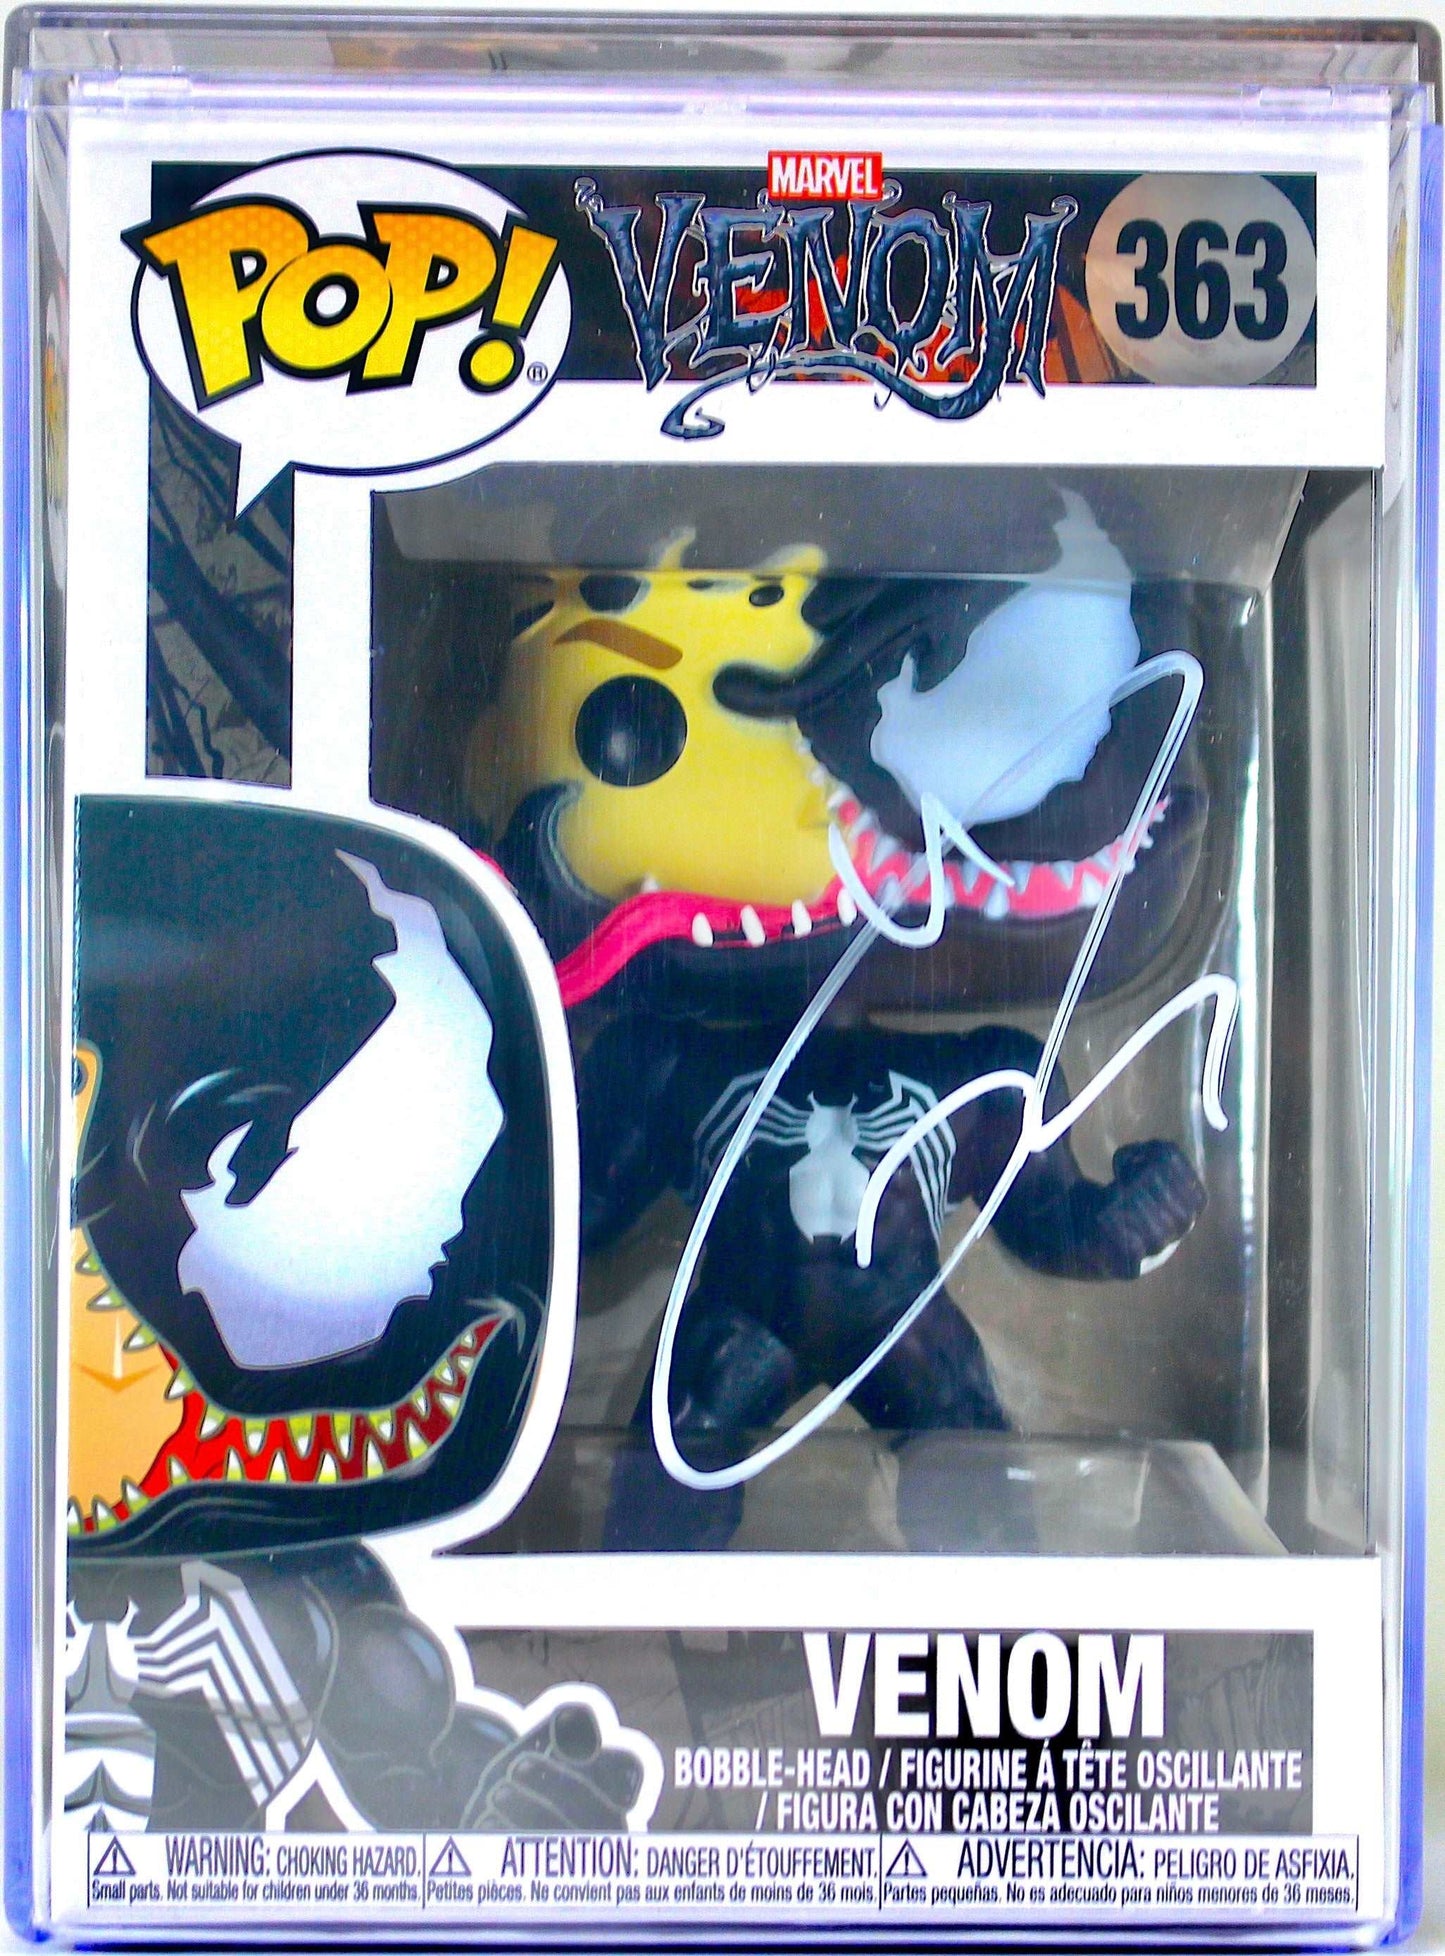 Autographed Signed By Tom Hardy Funko Pop! Marvel Venom #363 Hand signed Signature is Authenticated By JSA ✅ - DaFunkoShop - Funko Pop! Marvel Venom